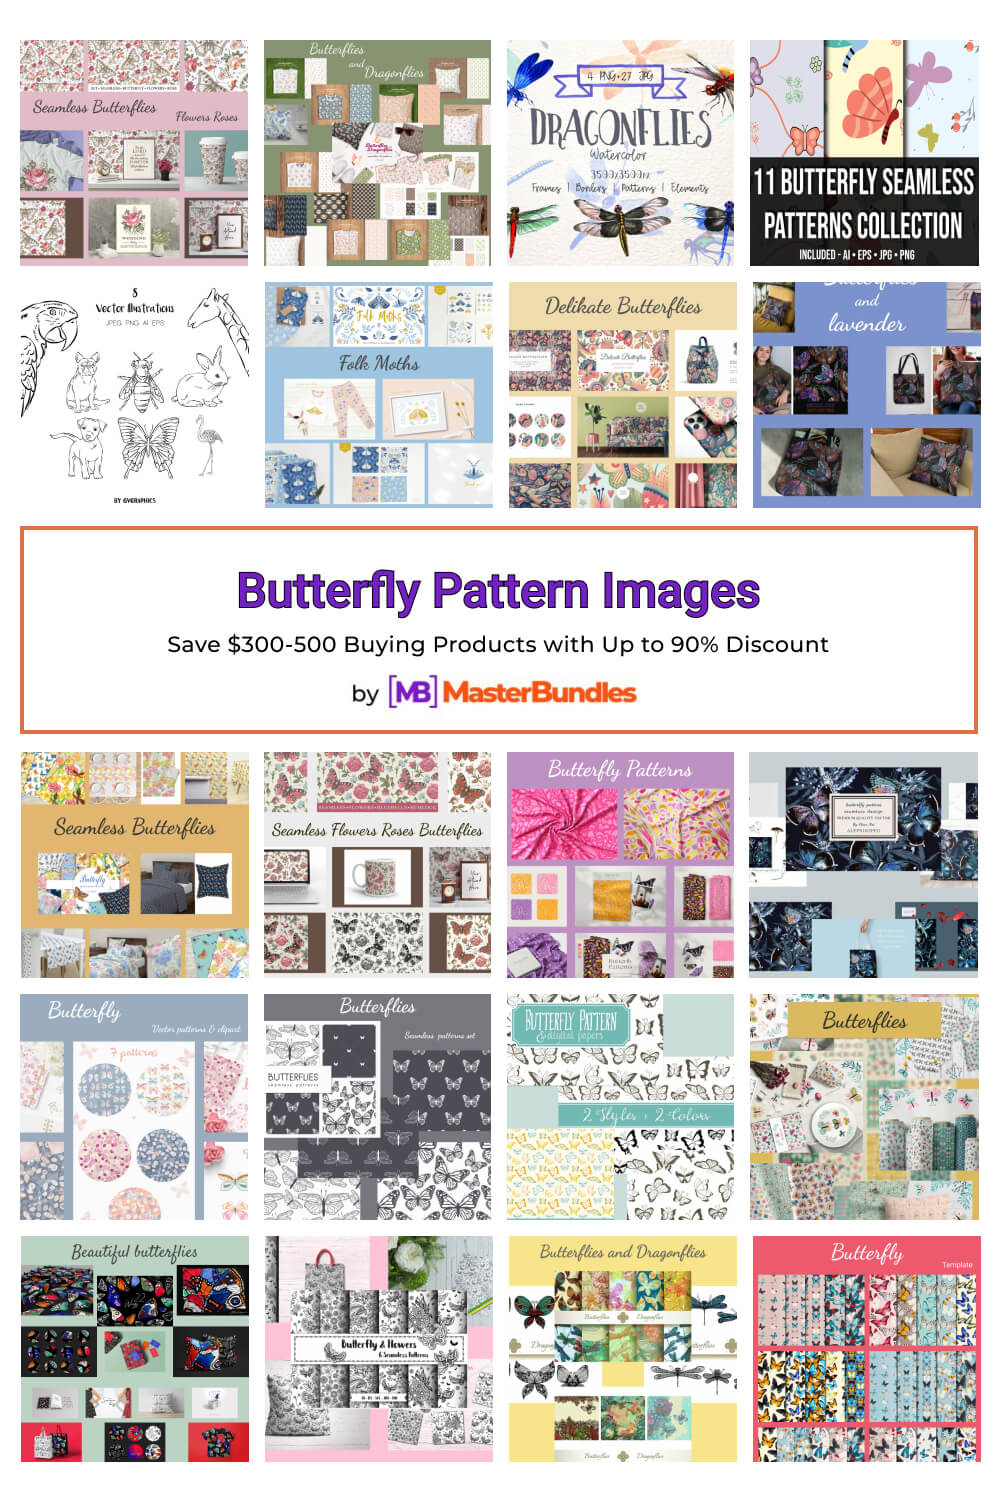 butterfly pattern images pinterest image.